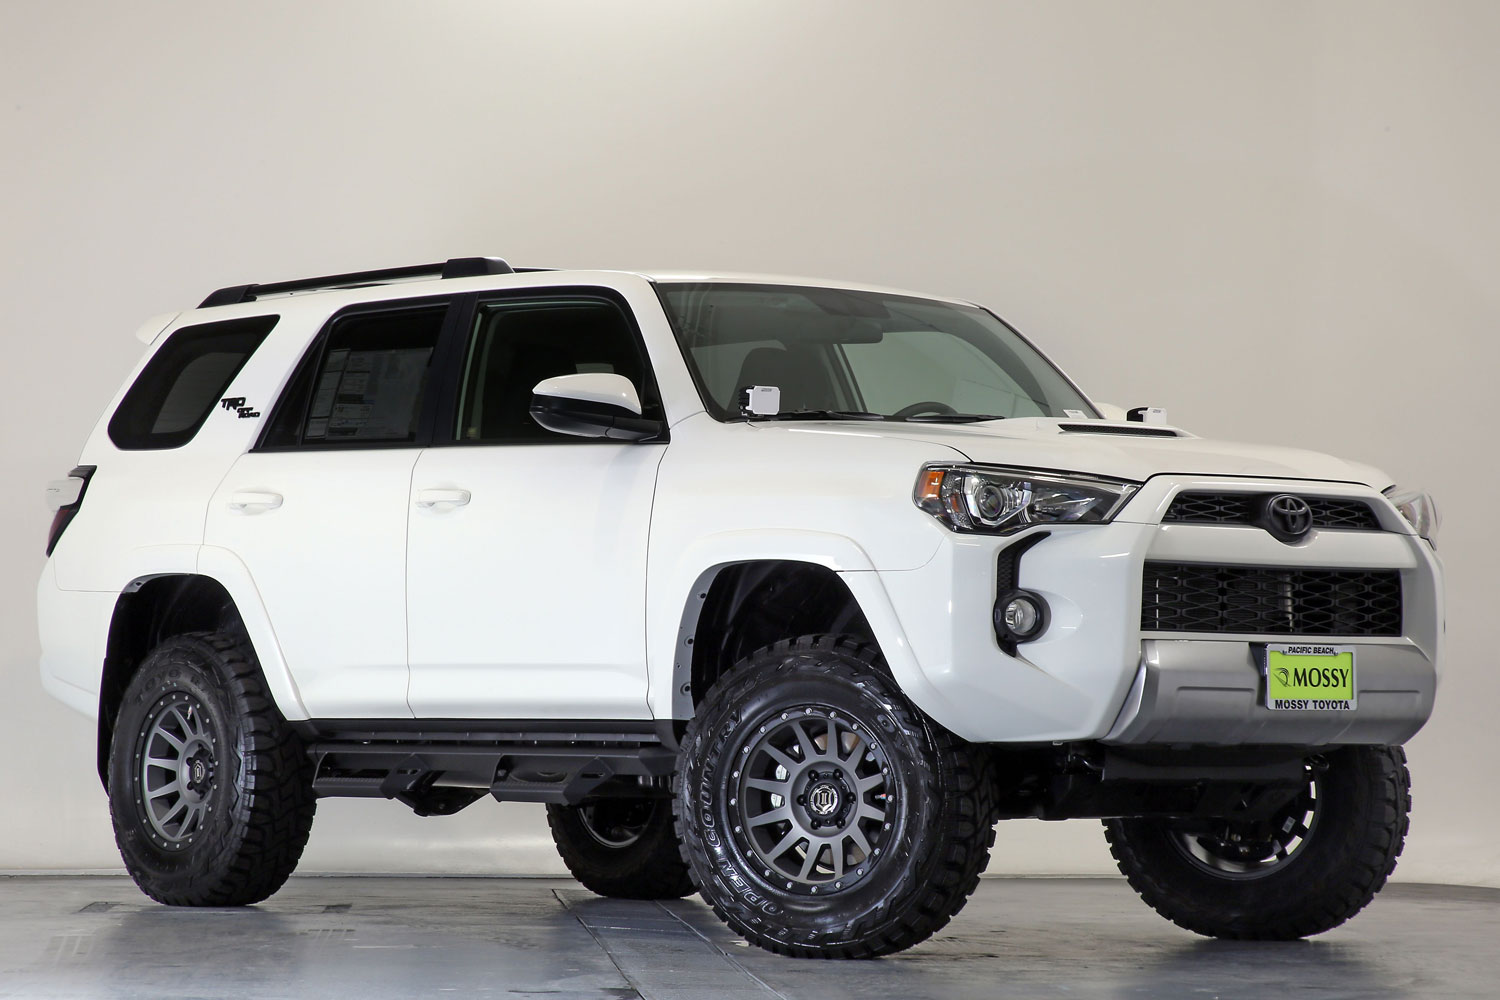 MOSSY - 4RUNNER STAGE 3 (Wheel & Tire Package with 3 inch Lift Kit)